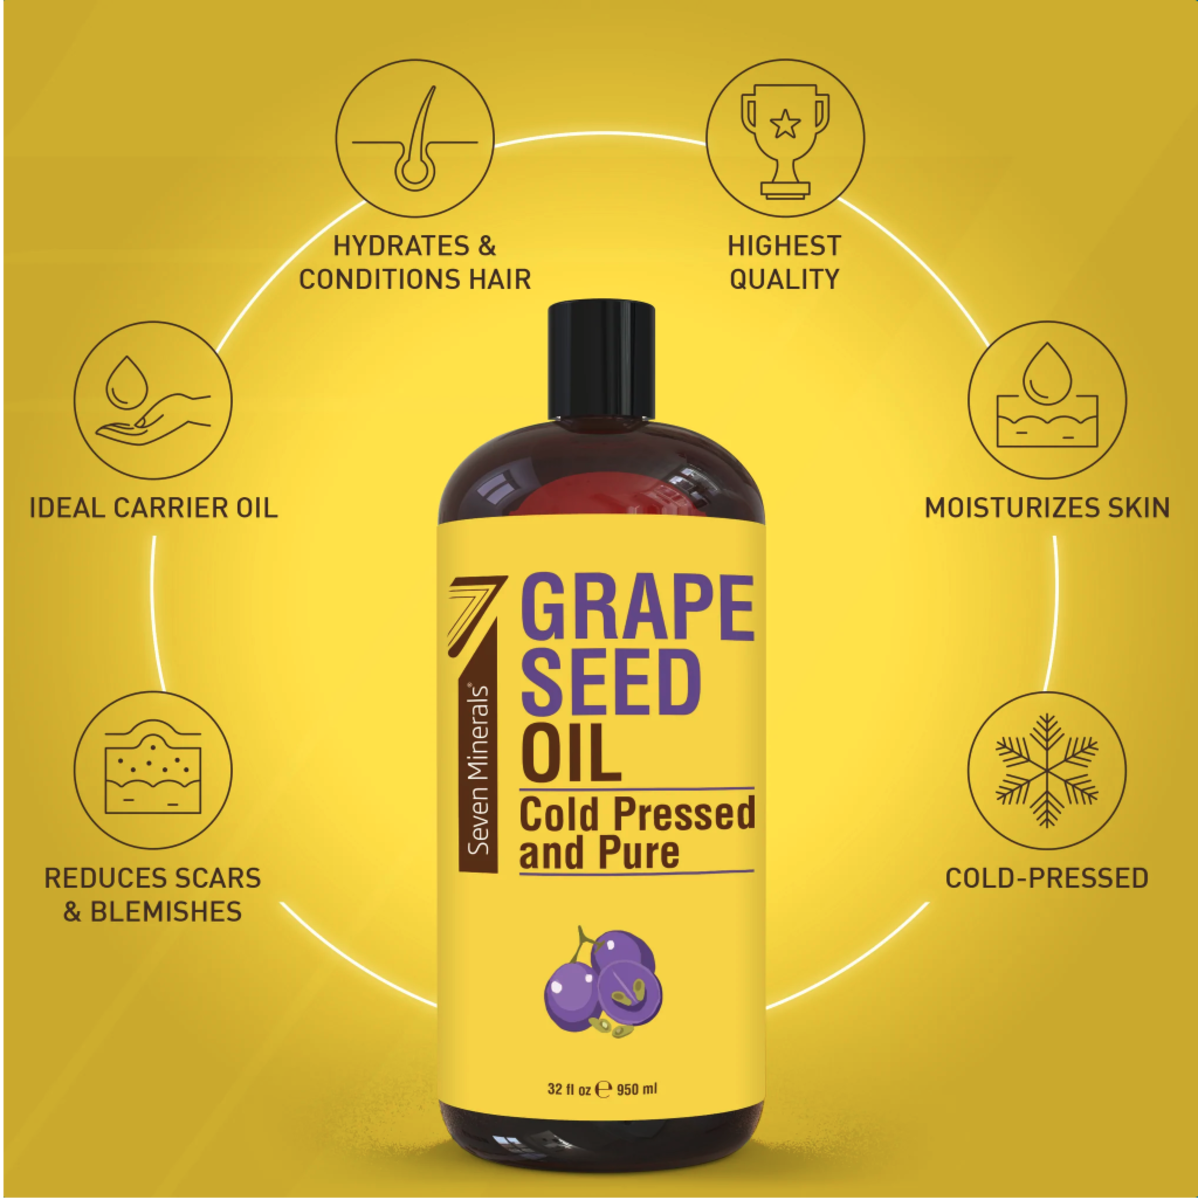 Look for cold-pressed grapeseed oil in a dark bottle. 